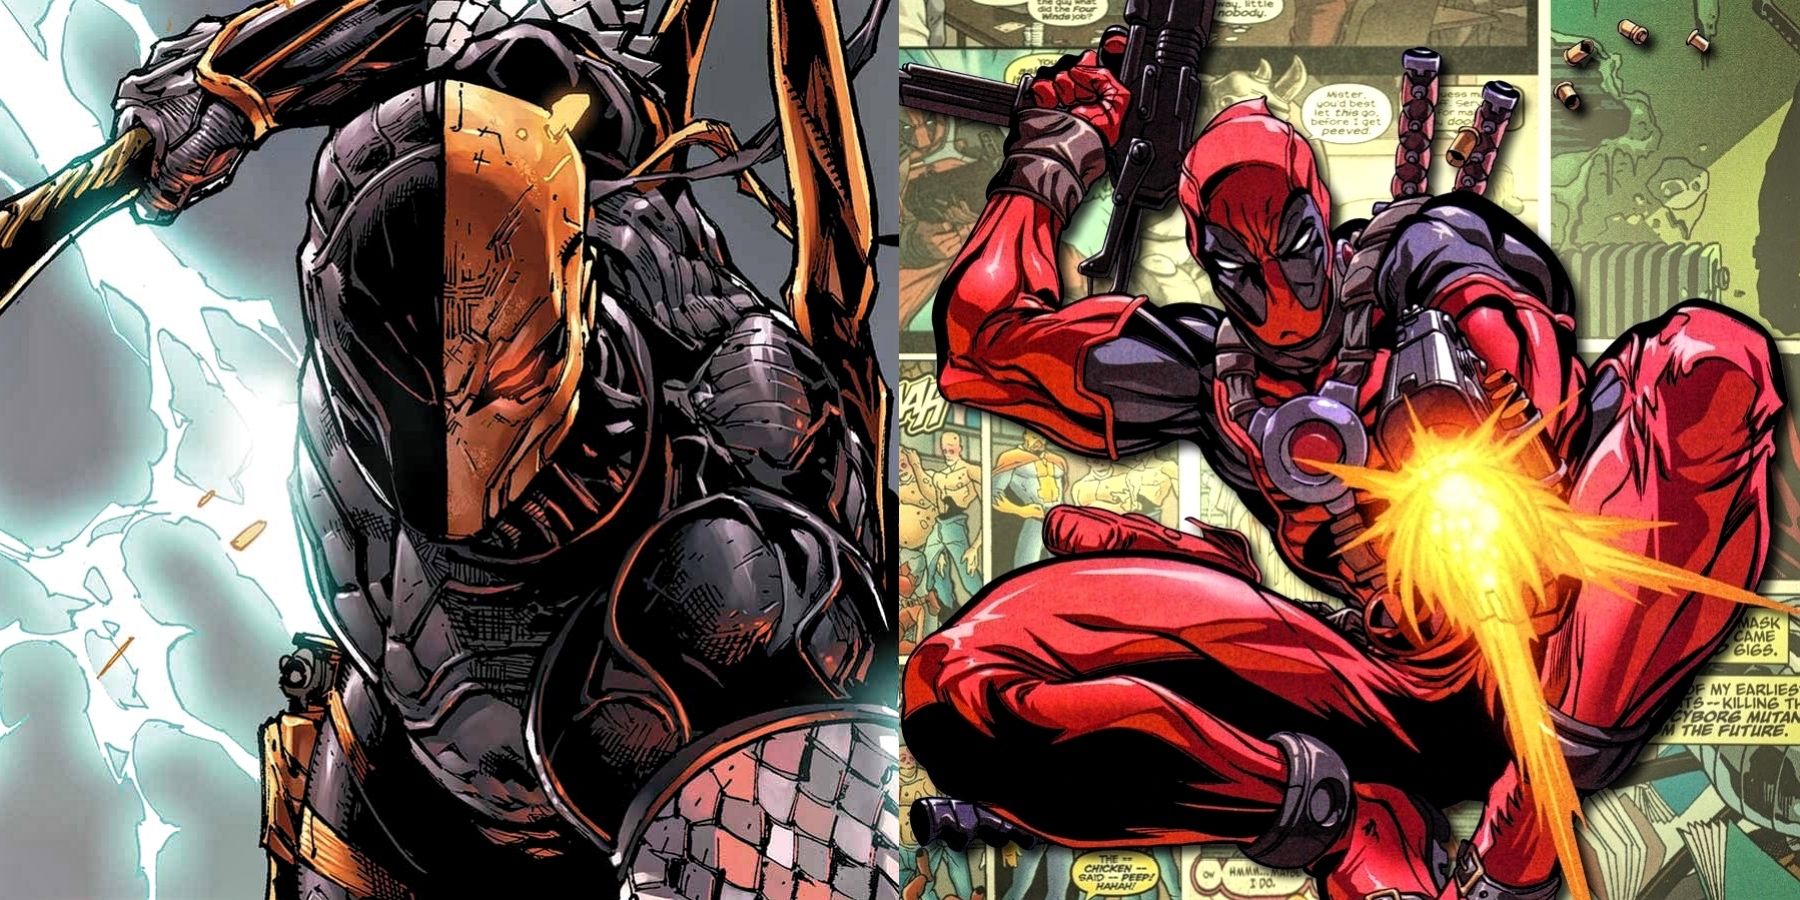 Deathstroke Writer Confirms His Deadpool Crossover Comic